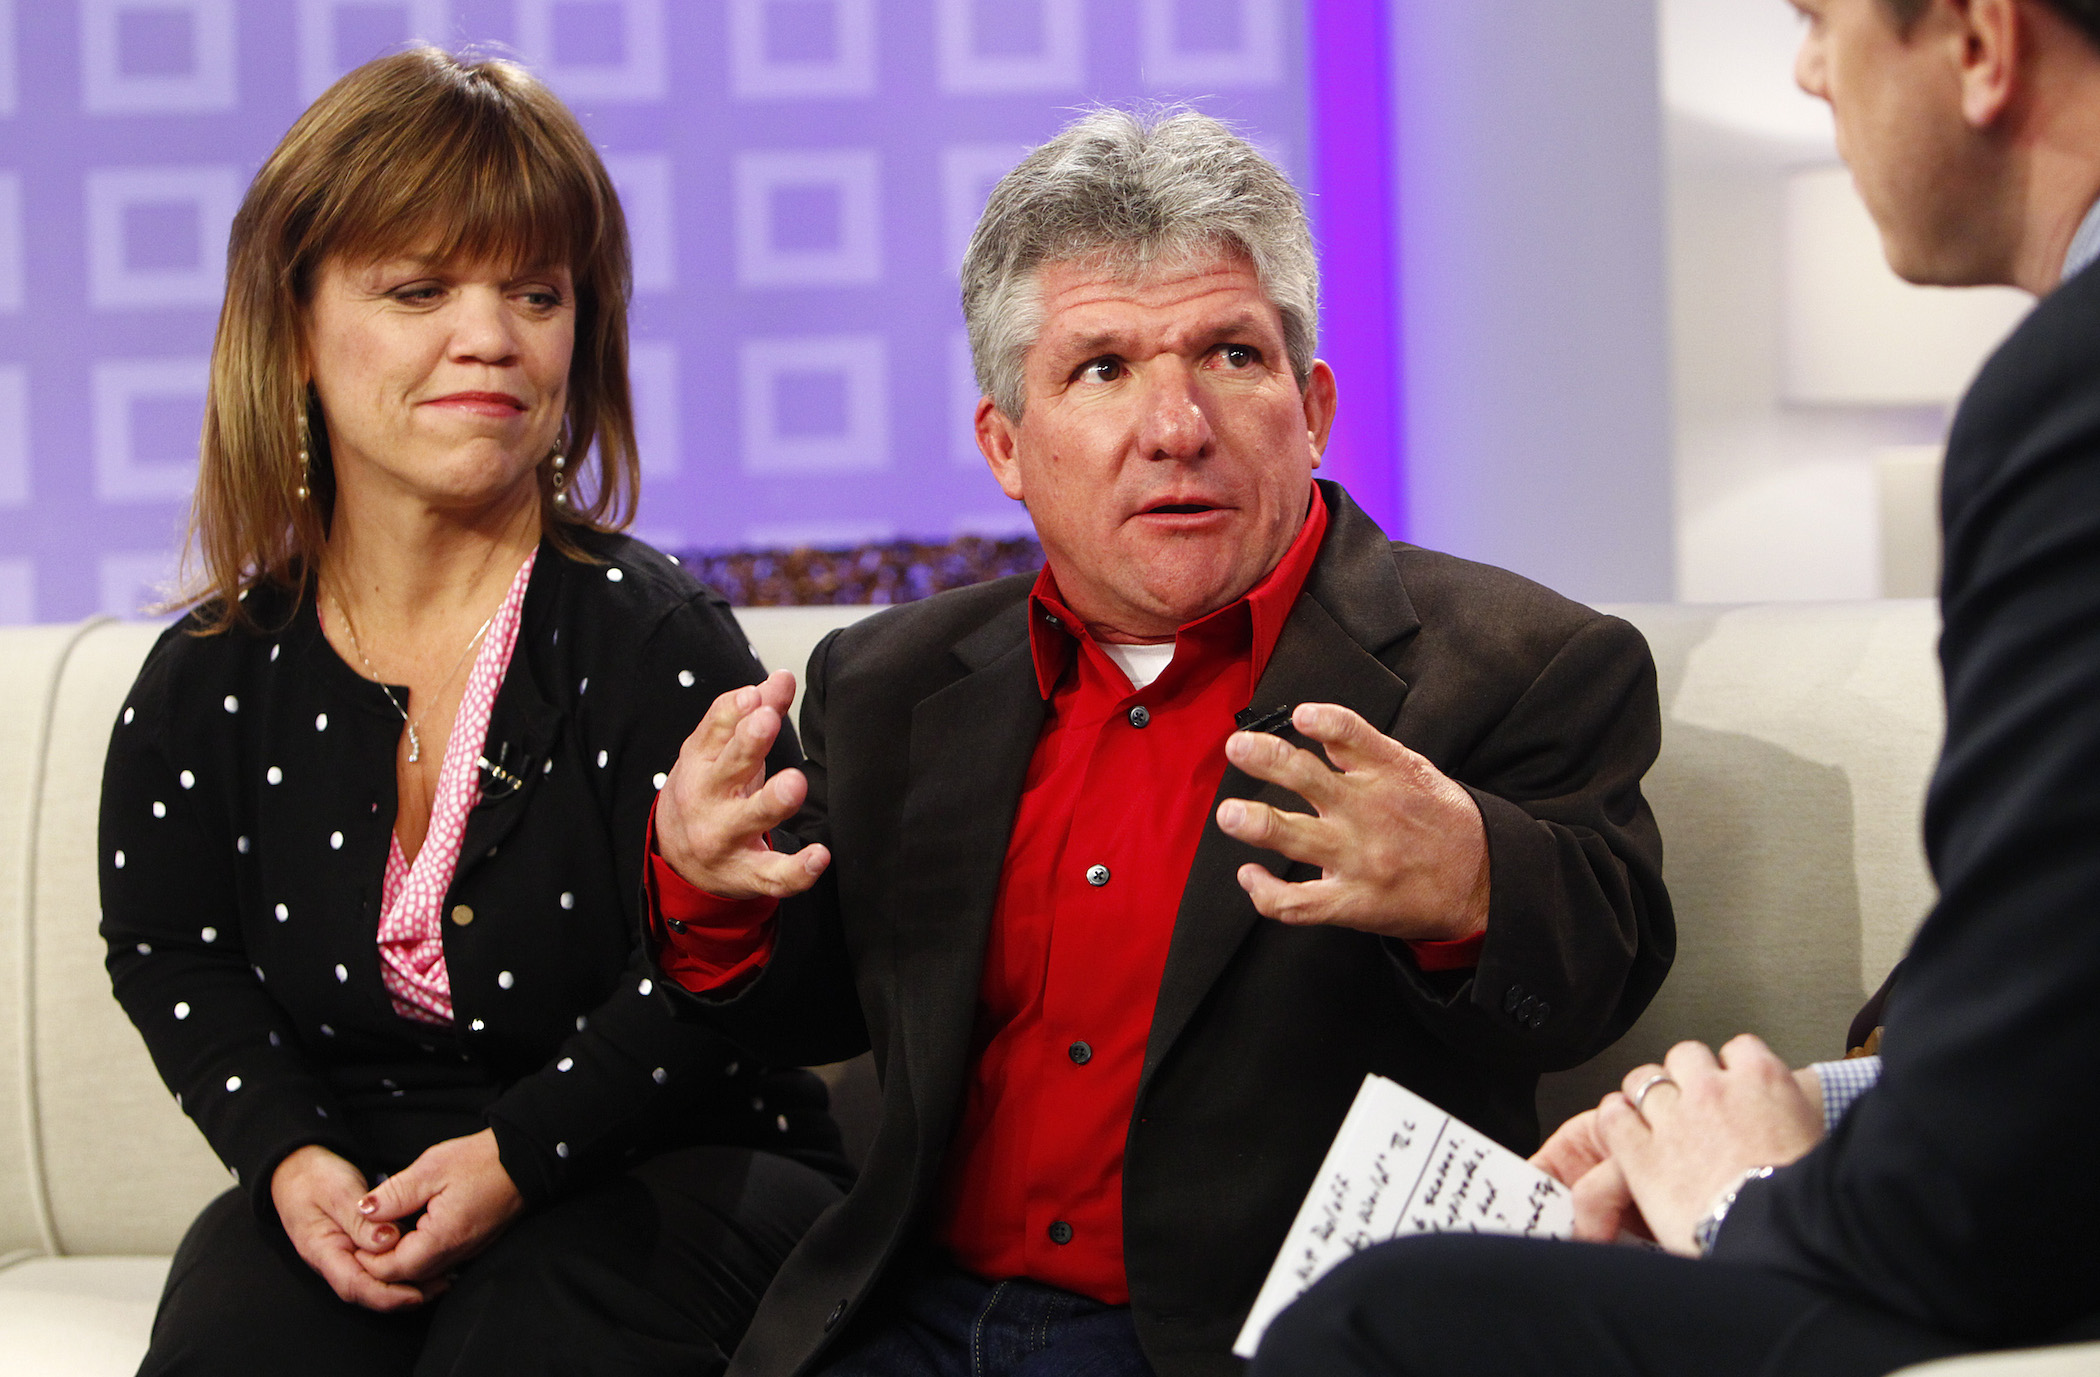 Amy Roloff and Matt Roloff from 'Little People, Big World' appear on NBC News' 'Today' show